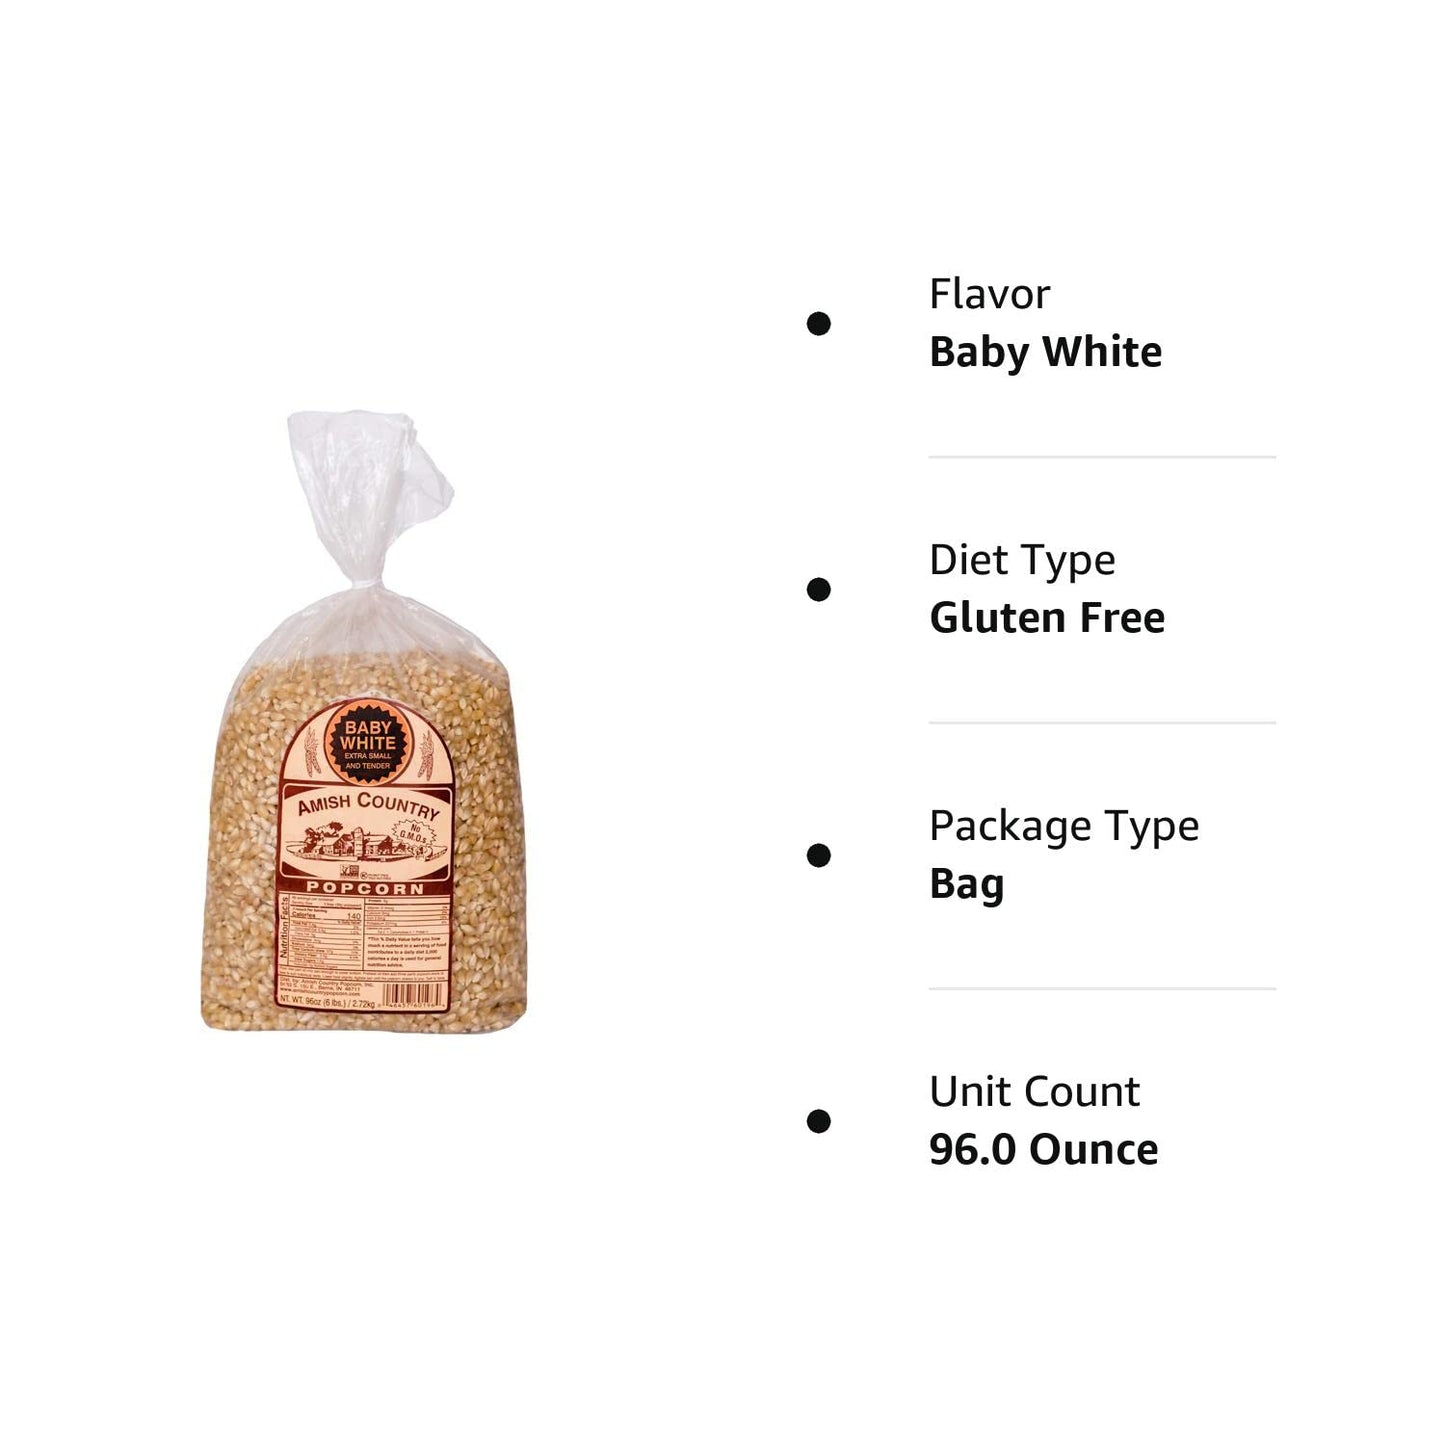 - Baby White (6 Pound Bag) - Small & Tender Popcorn - Old Fashioned and Delicious with Recipe Guide